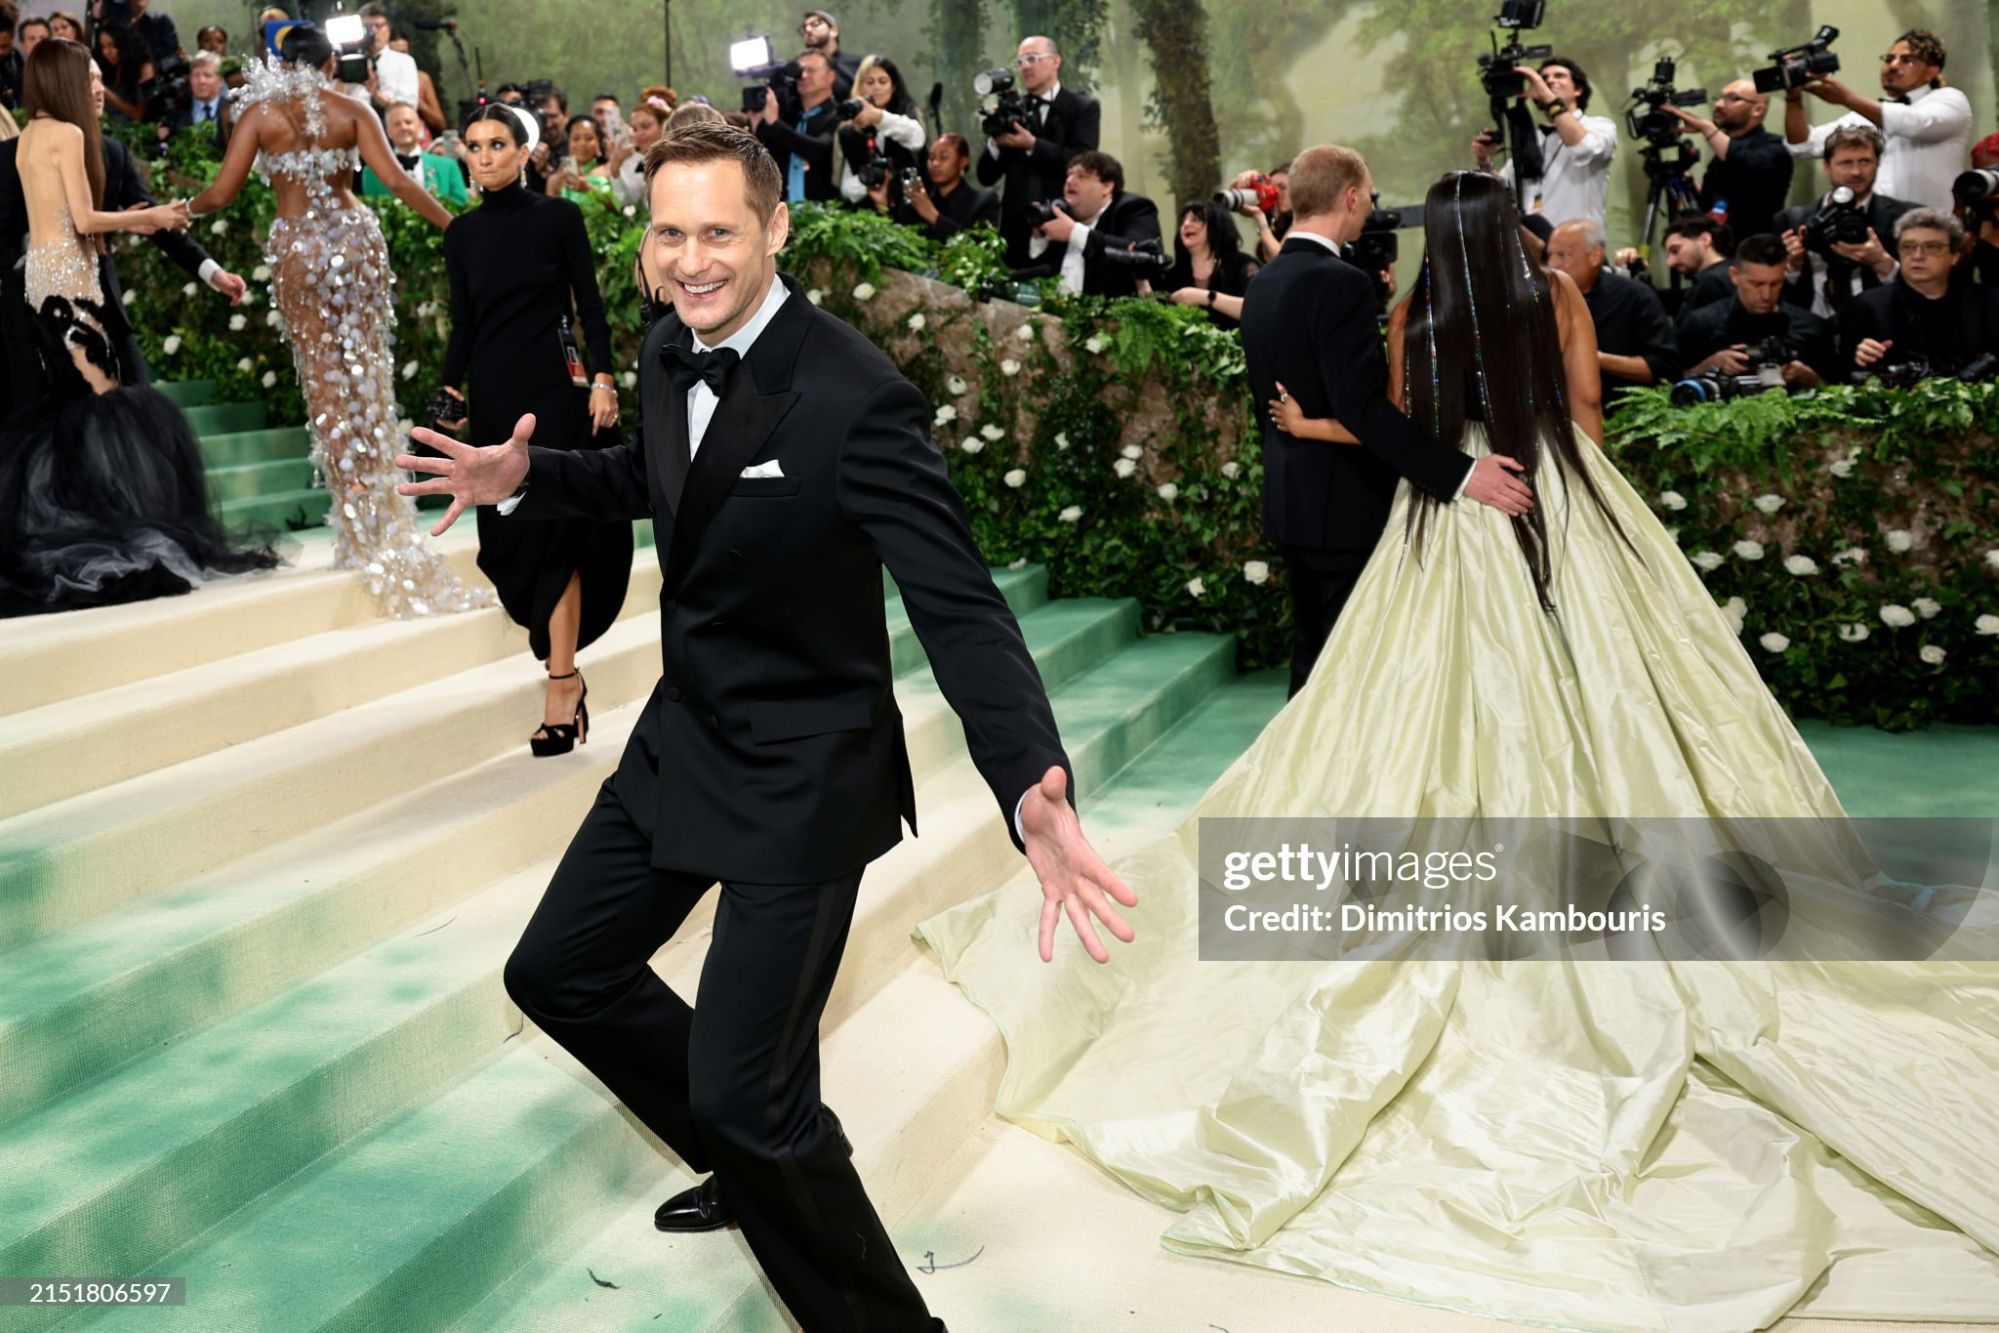 gettyimages-2151806597-2048x2048.jpg